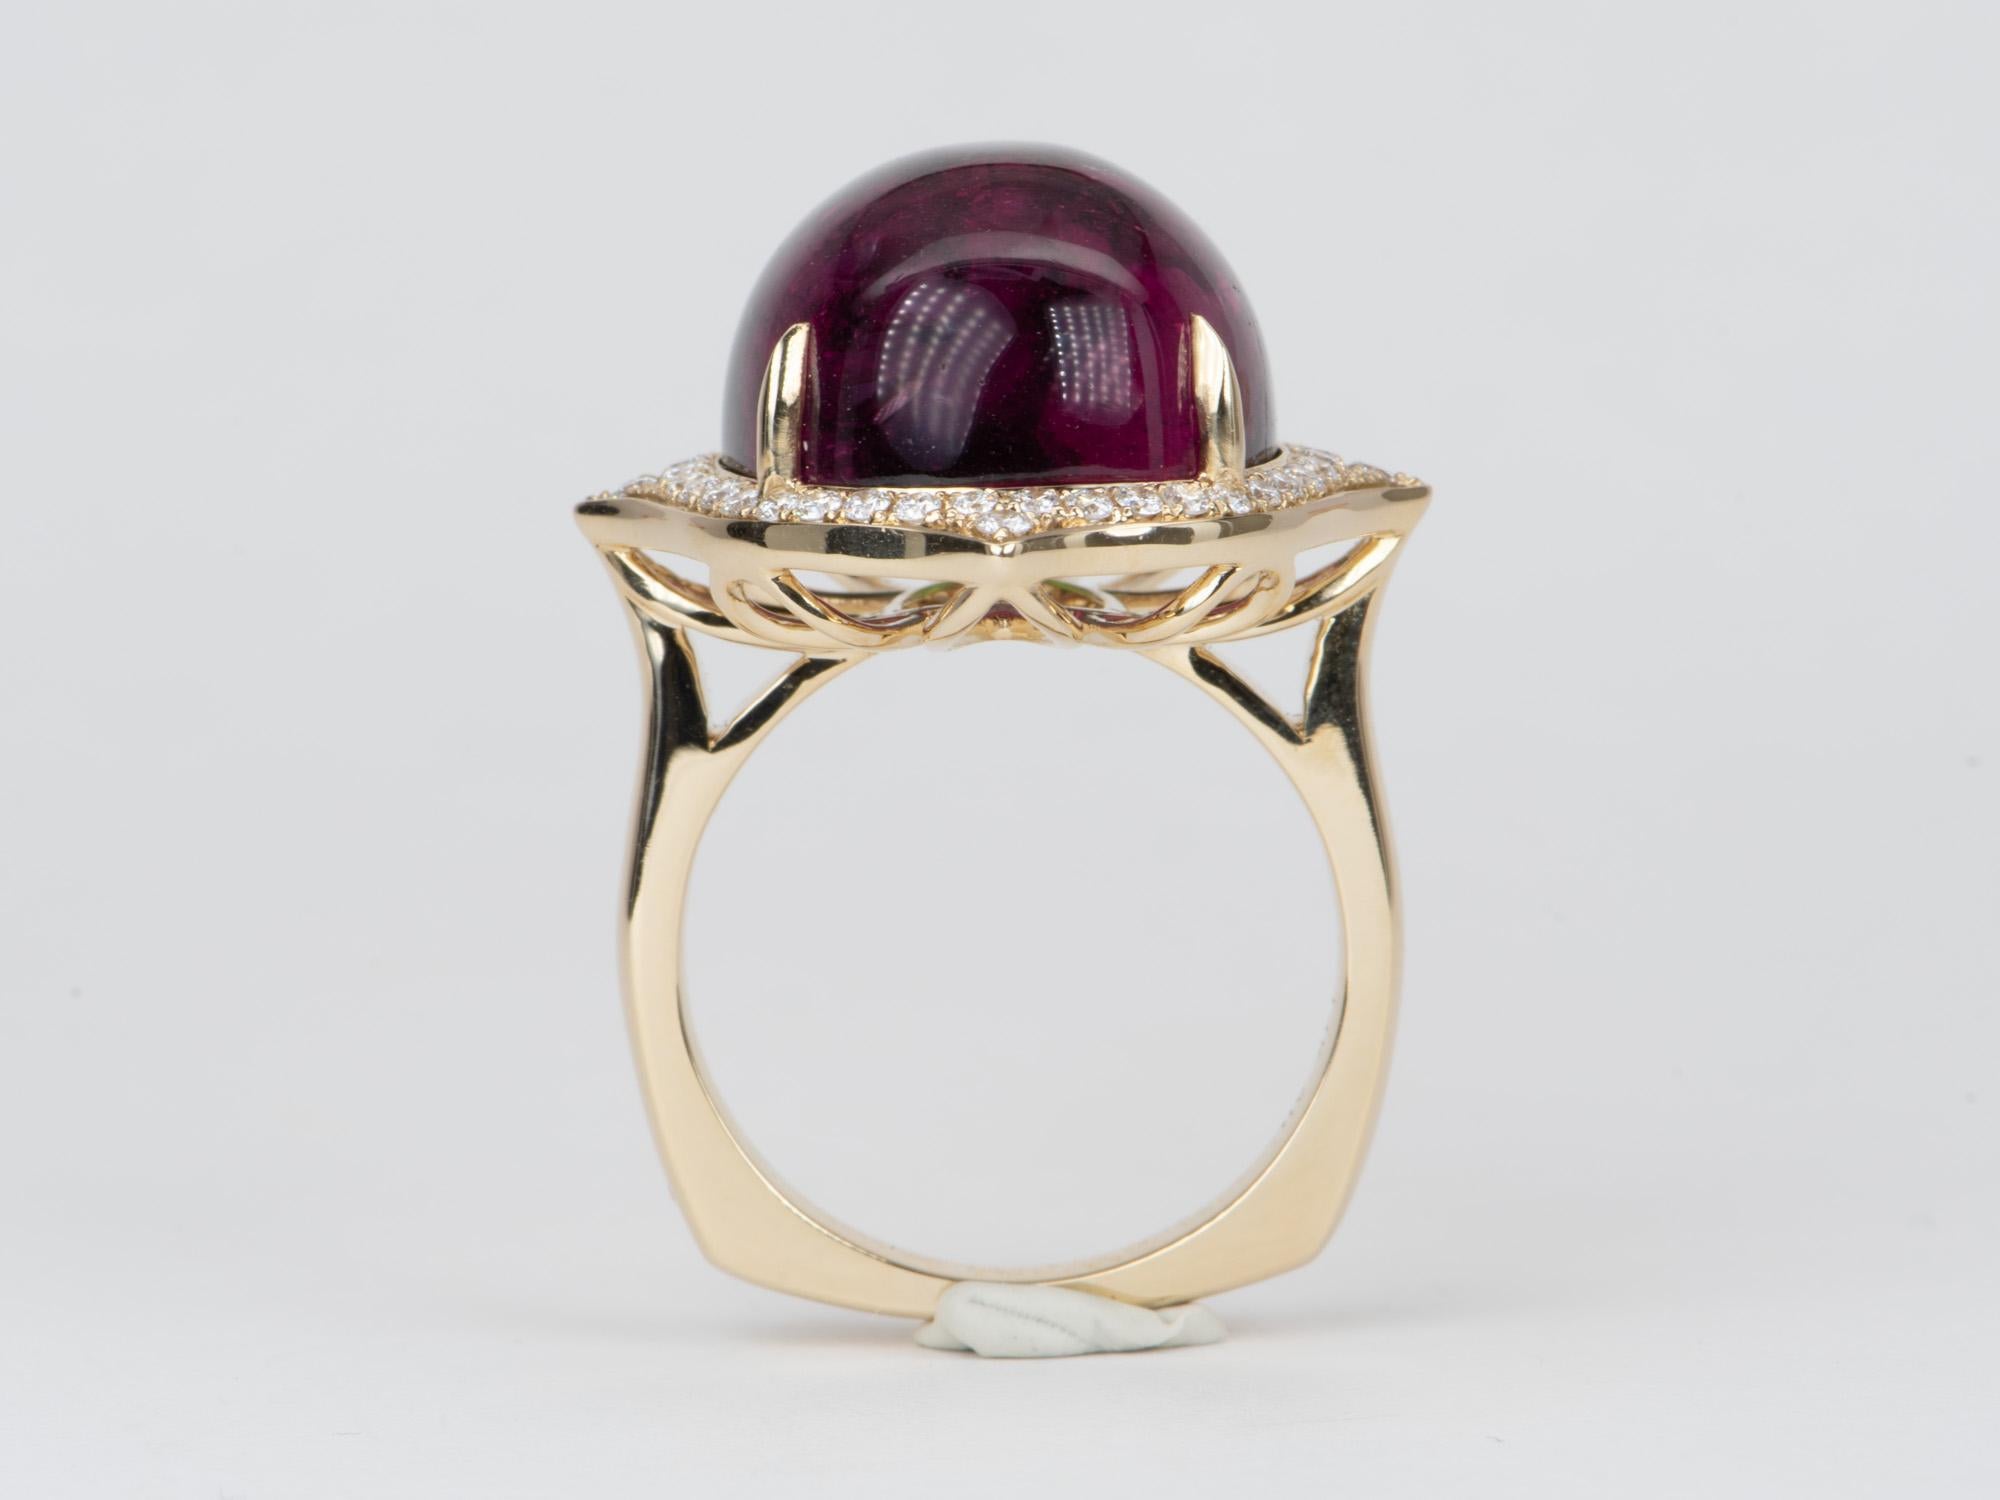 28.29ct Bi-Color Tourmaline Cocktail Ring 14K Gold 14g+ R6544 In New Condition For Sale In Osprey, FL